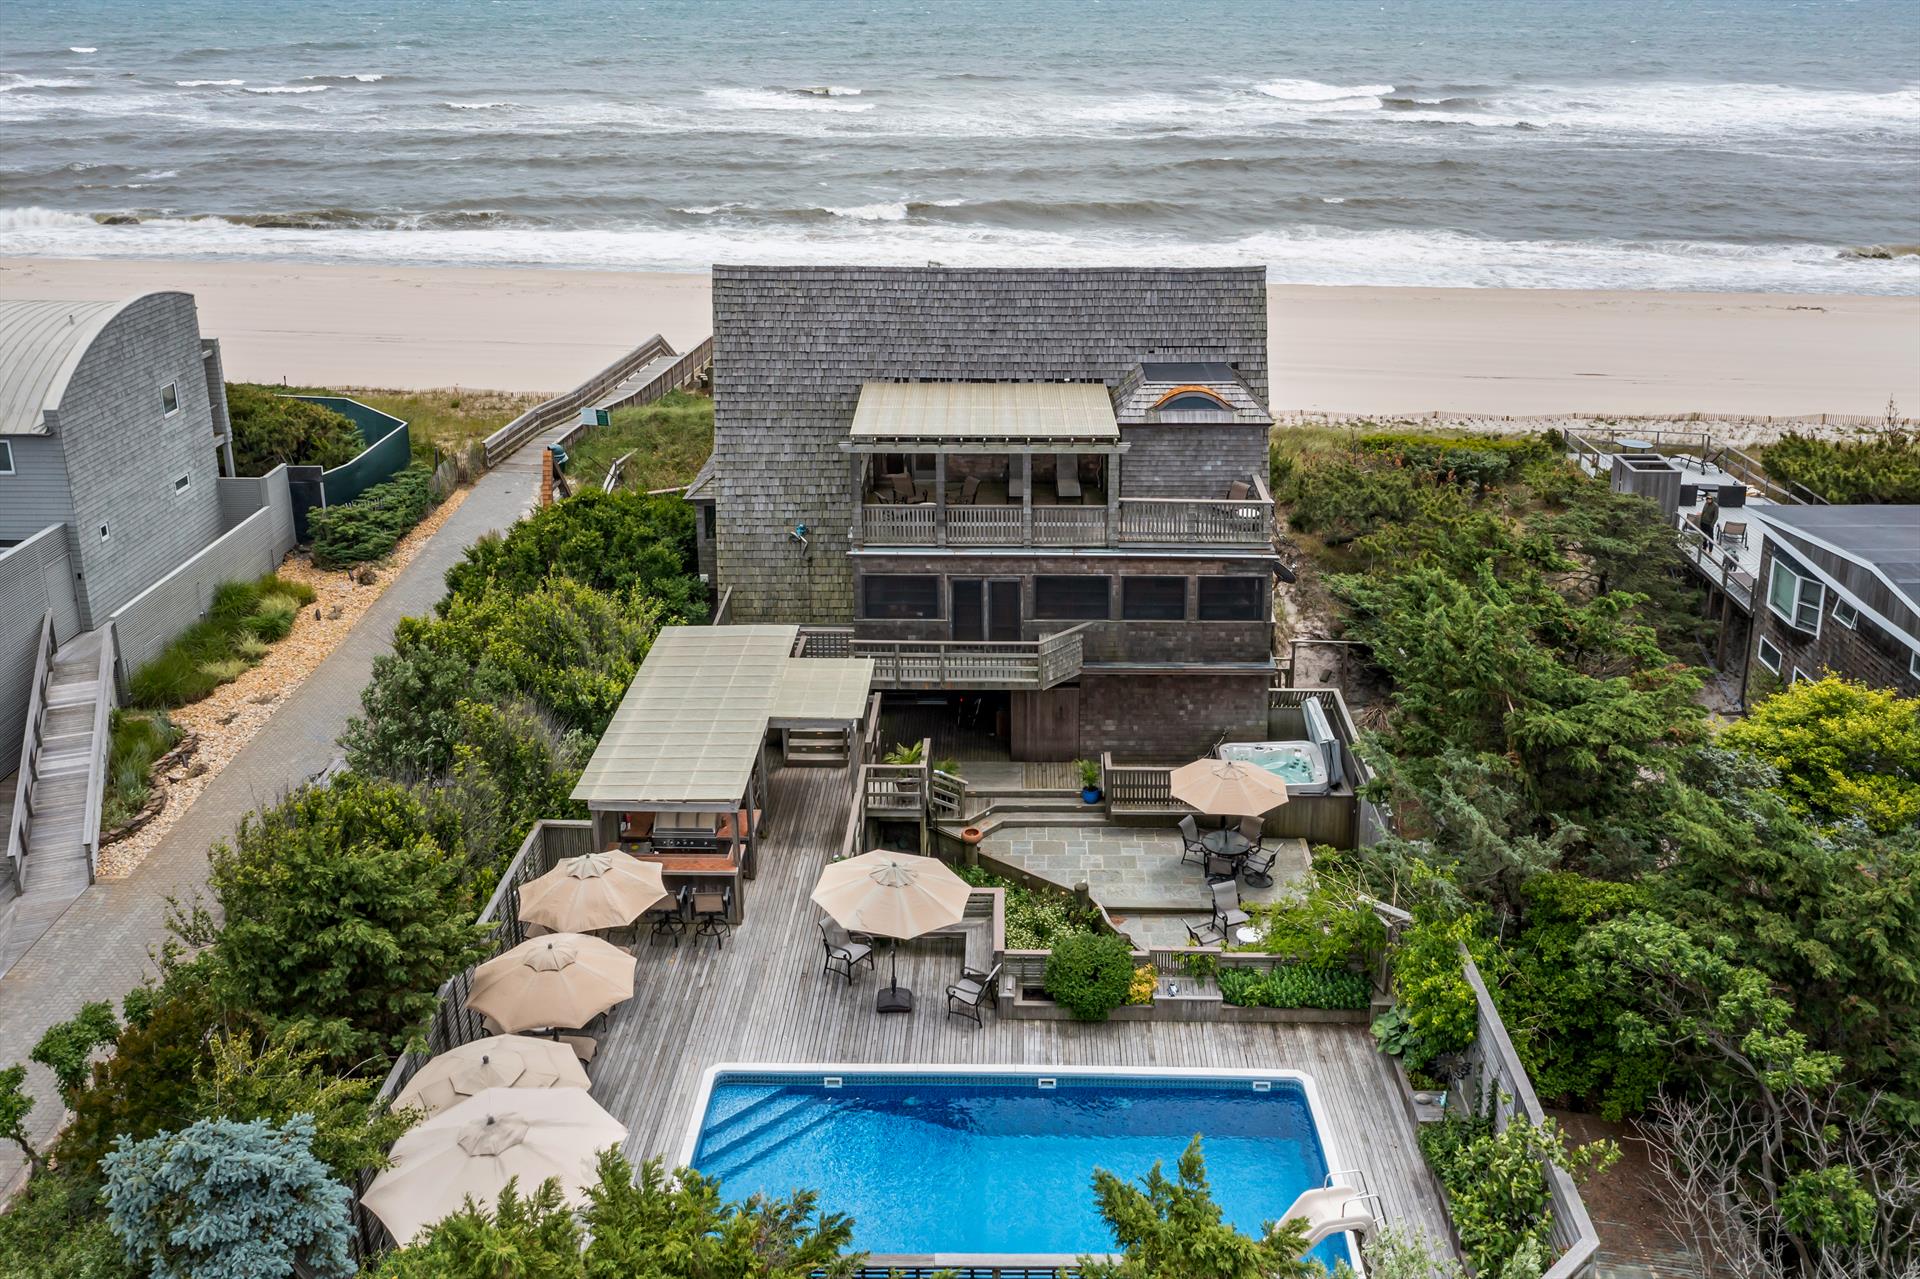 This spectacular 3 level oceanfront residence boasts over 3,100 SF of living space.  Enjoy breathtaking panoramic beach views in Fire Island's most coveted location.  With 7 bedrooms, 3 full baths, and 3 half baths, this home can comfortably accommodate extended family and guests.  Situated on an enormous parcel, the 160' X 100' lot is more than 2.5 times a standard size parcel.  Extraordinarily rare opportunity to own a property of this size on the beachfront.  This highly coveted property is an entertainer's dream with a large swimming pool, hot tub, outdoor kitchen, game lounge, screened in porch, and multiple decks.  The upper level features a private and luxurious primary bedroom with en-suite bathroom, and private balcony, as well as a spacious office space, all with sweeping beach views.  